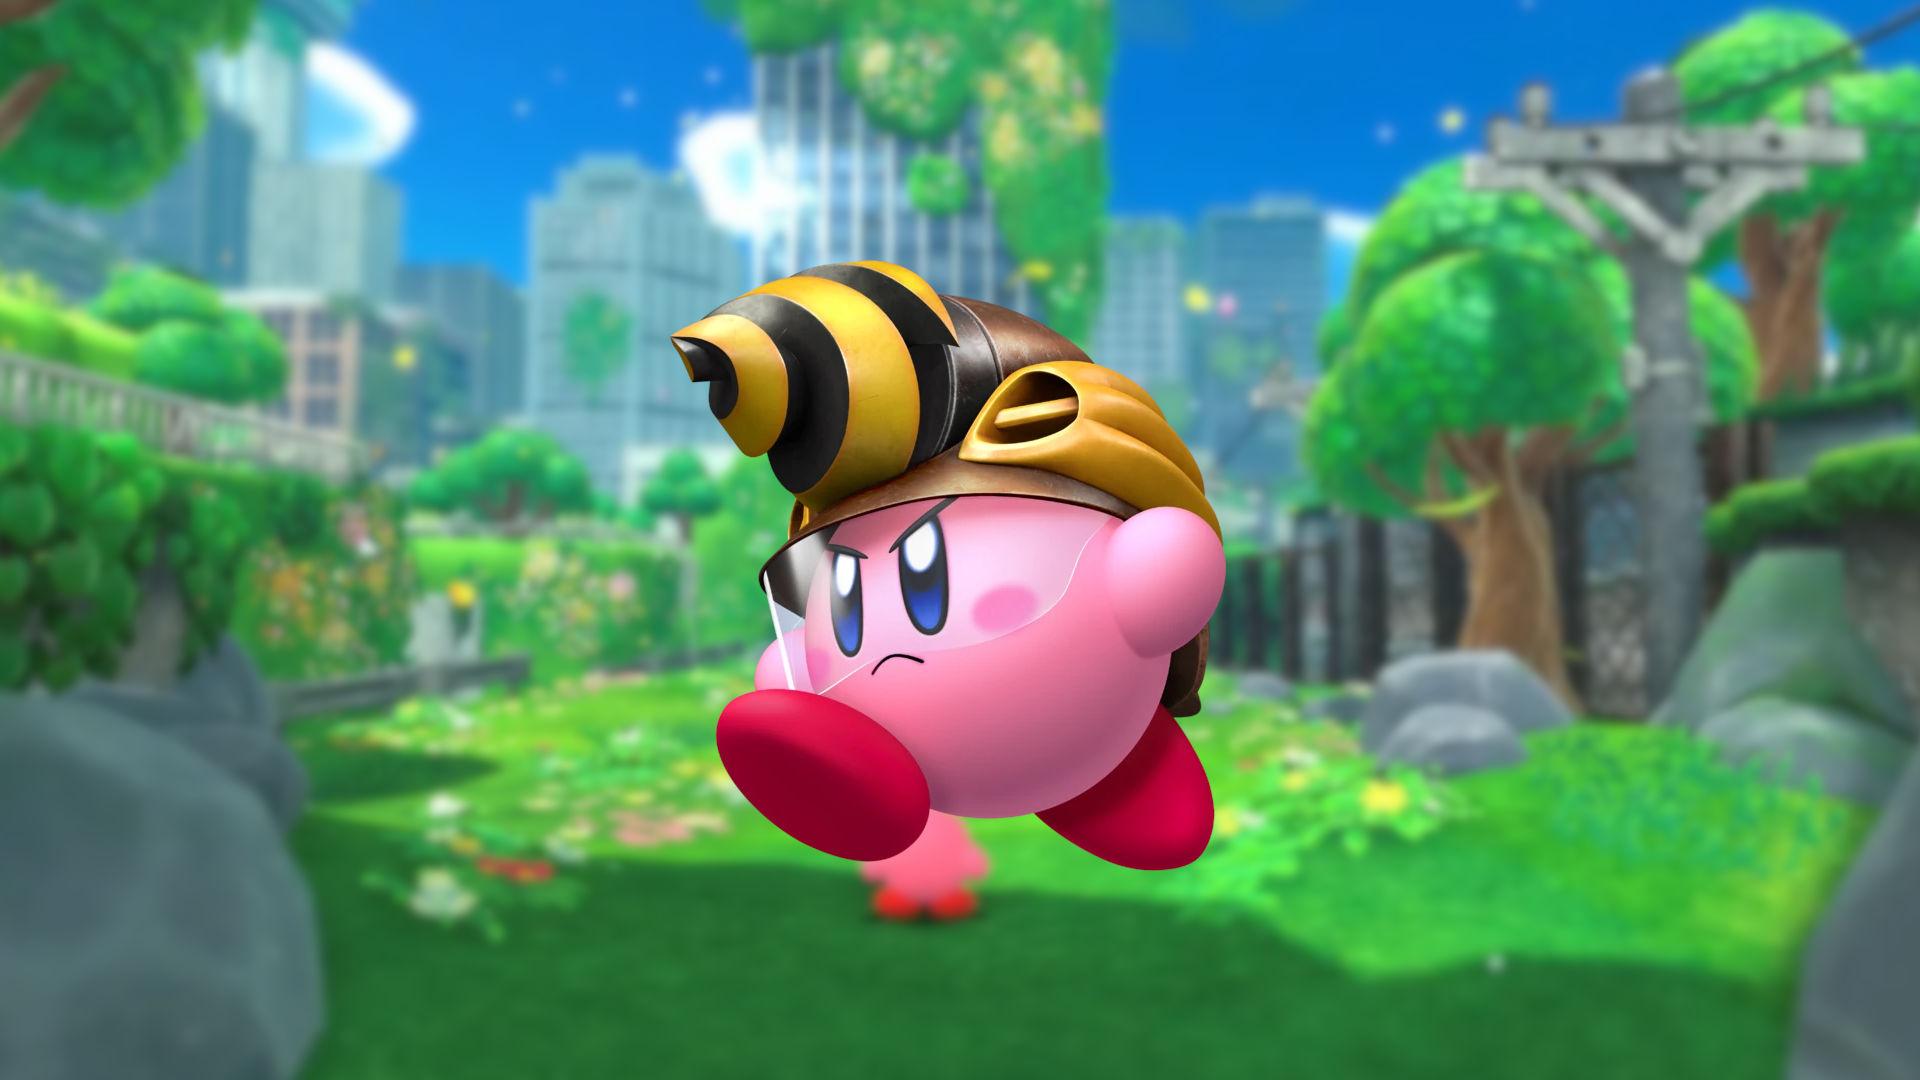 Kirby and the Forgotten Land challenged its developers to get the  difficulty just right - AUTOMATON WEST